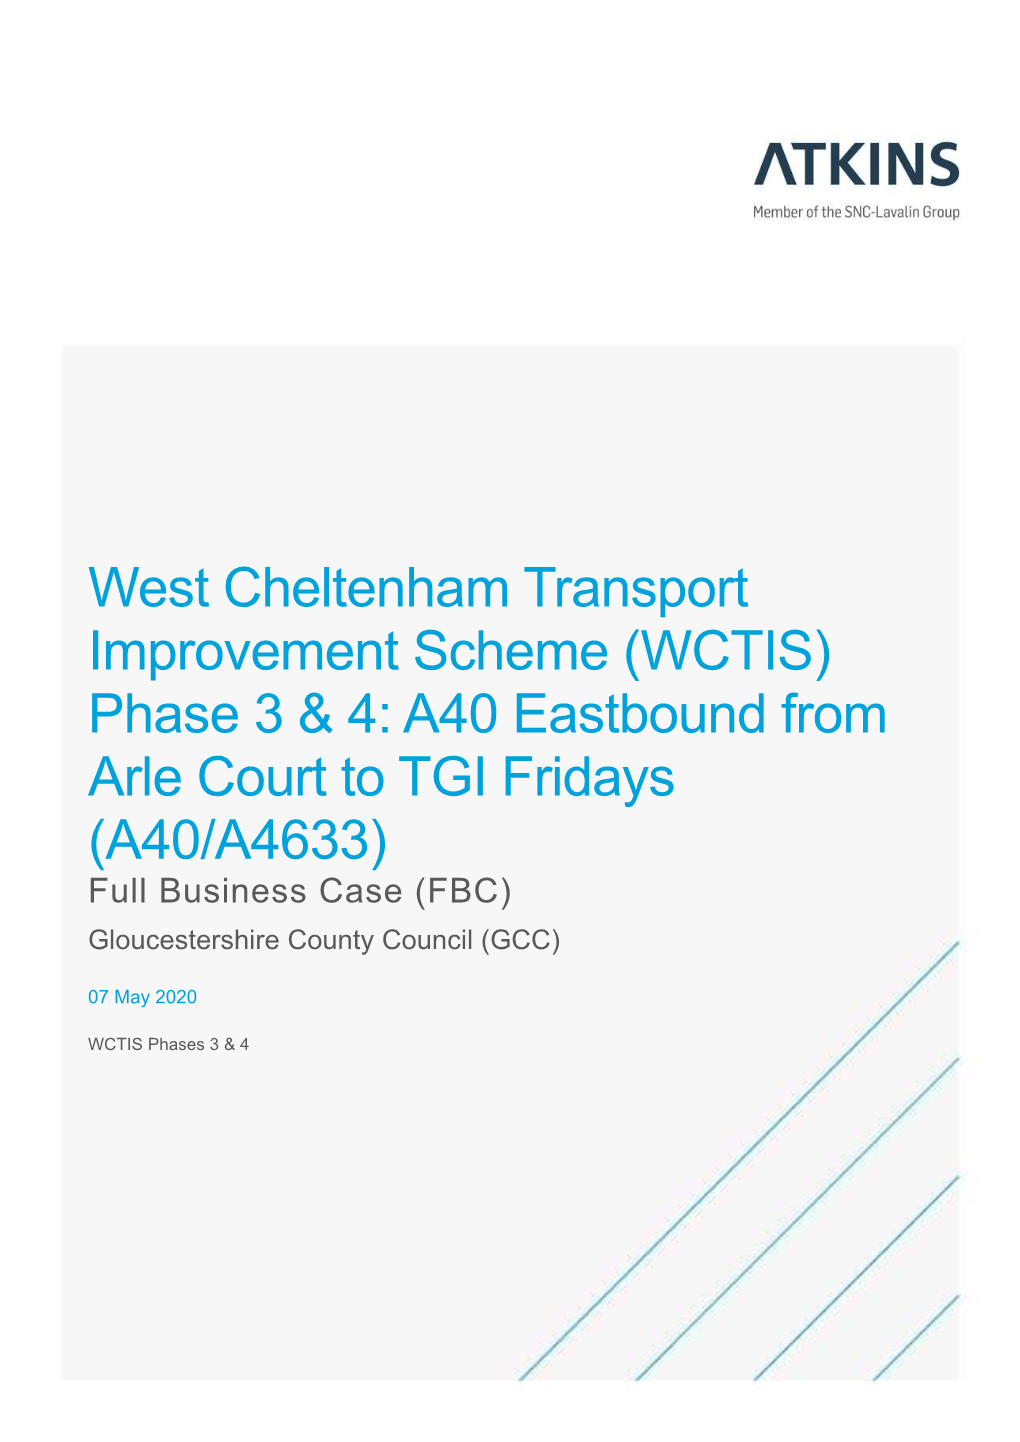 (WCTIS) Phase 3 & 4: A40 Eastbound from Arle Court to TGI Fridays